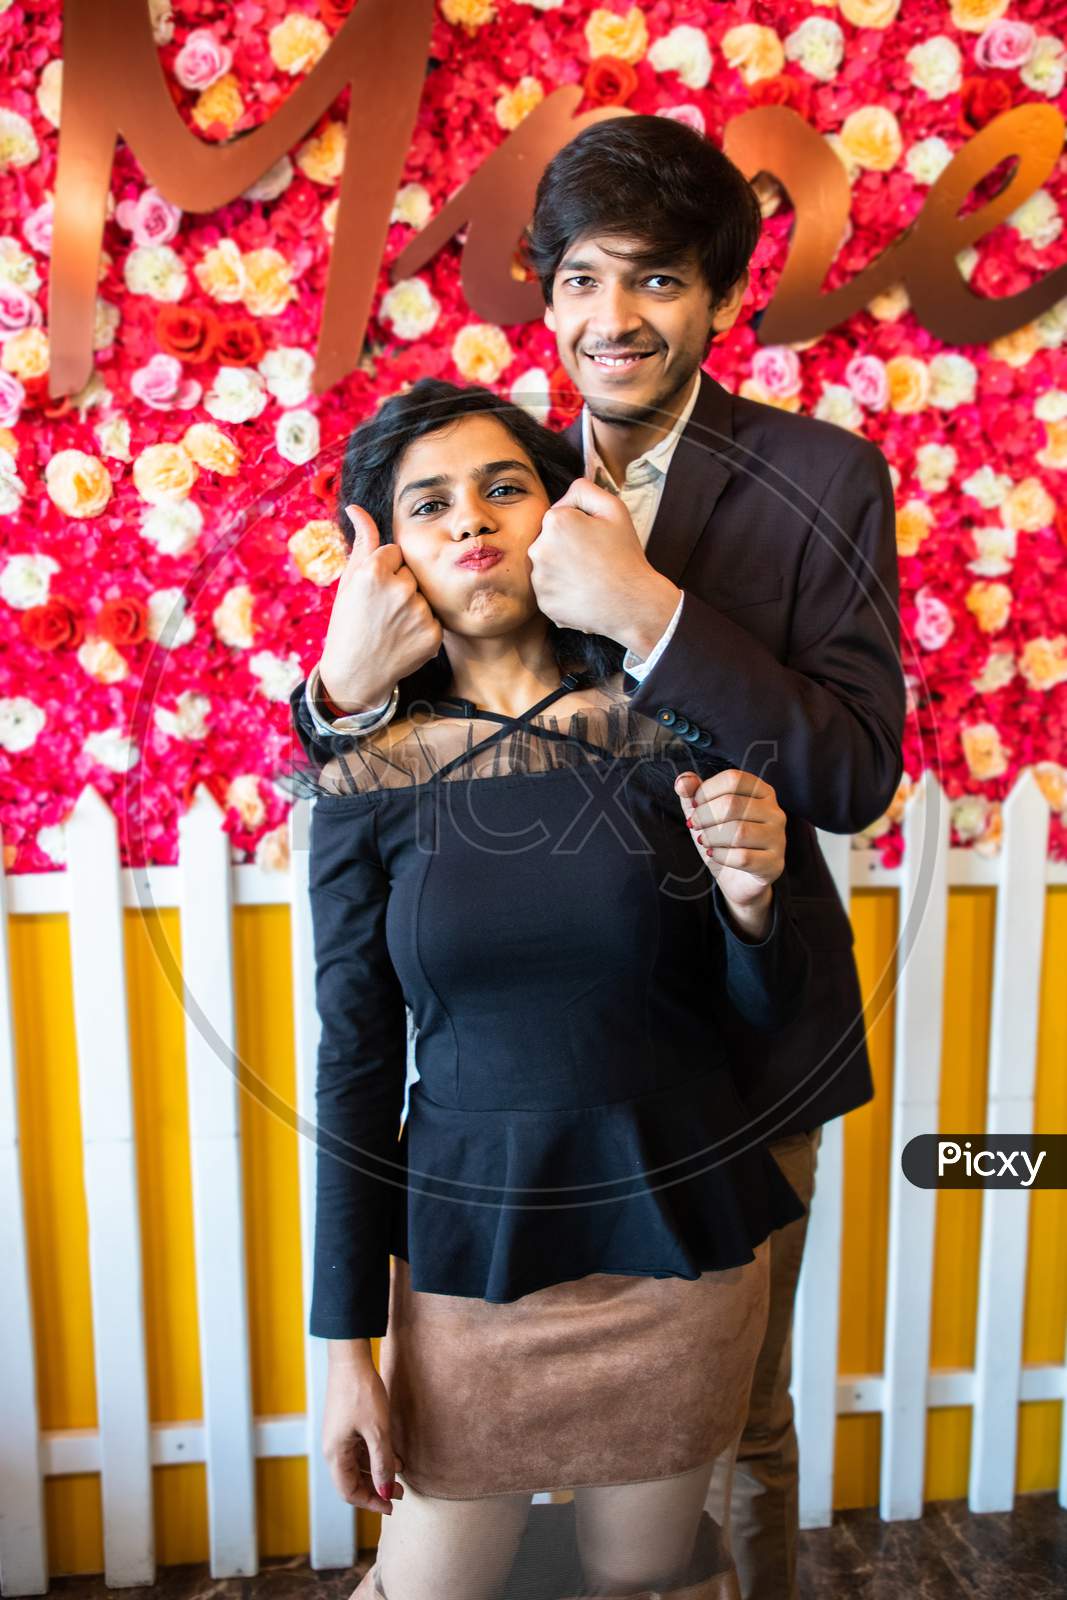 Young Happy Cheerful Indian Couple In Love Have Fun Indoor Against Floral Background, Boyfriend Girlfriend Relationship, New Year Or Valentines Day.